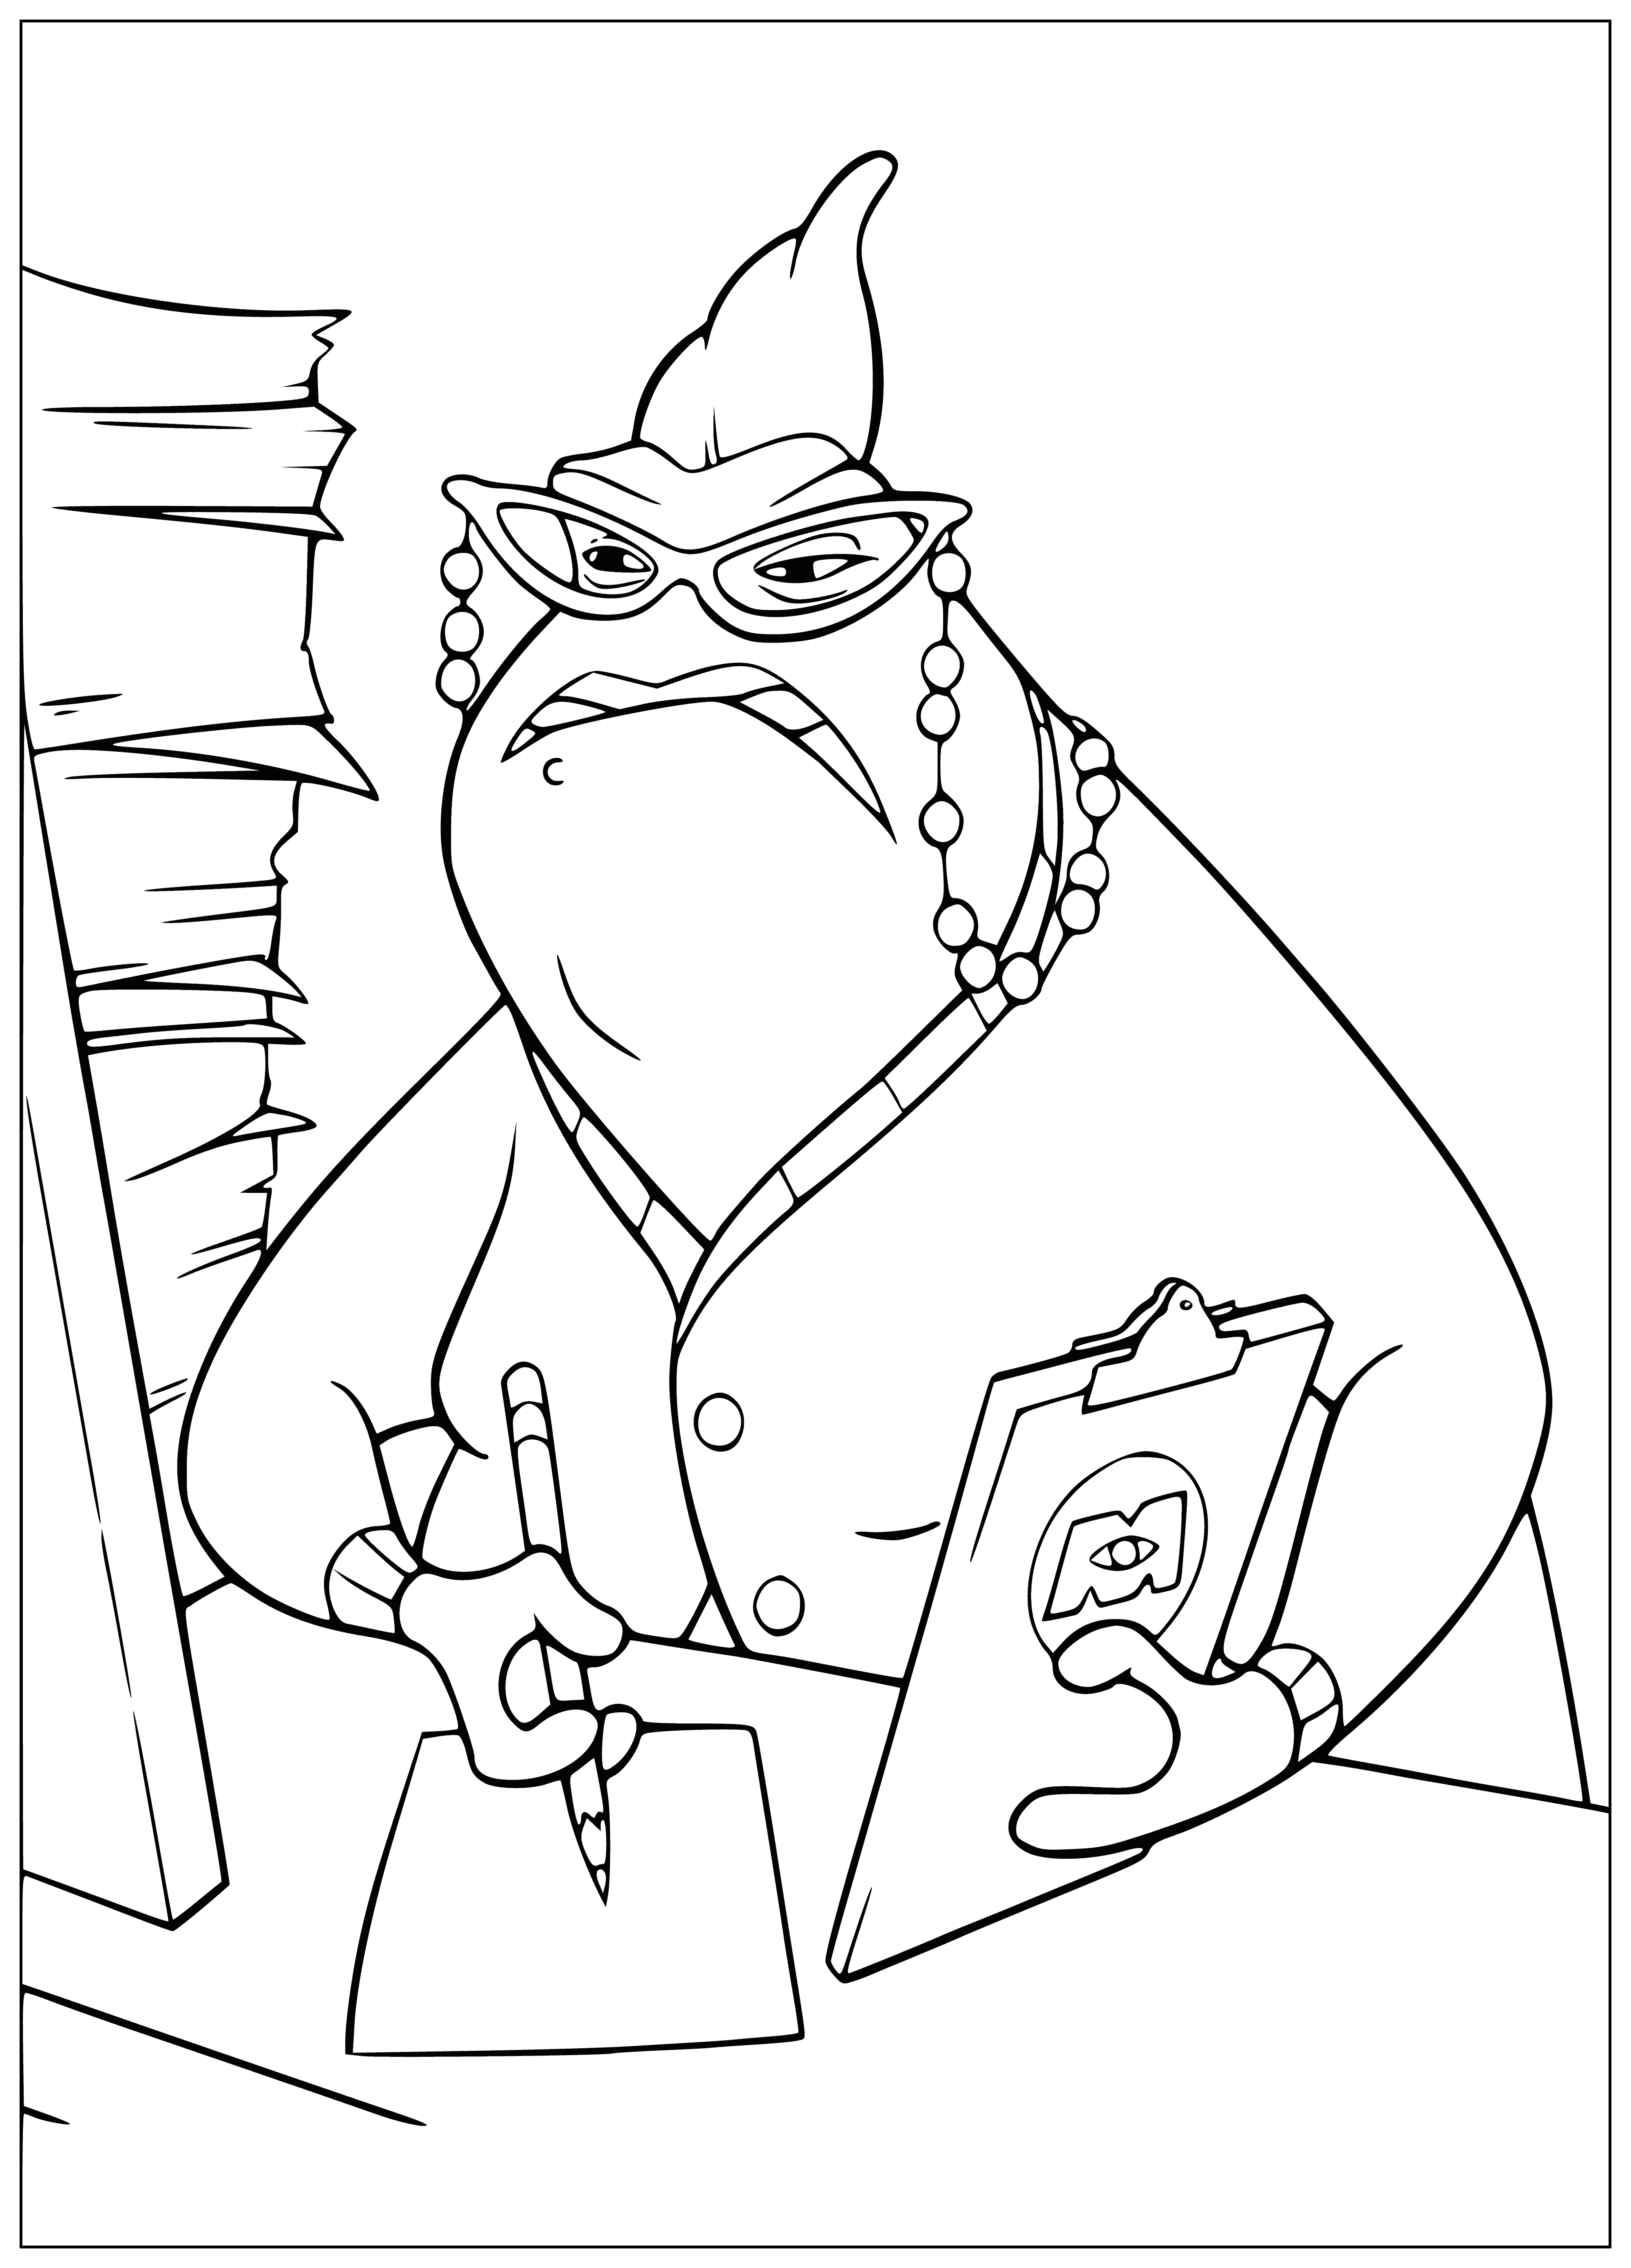 Administrator coloring page